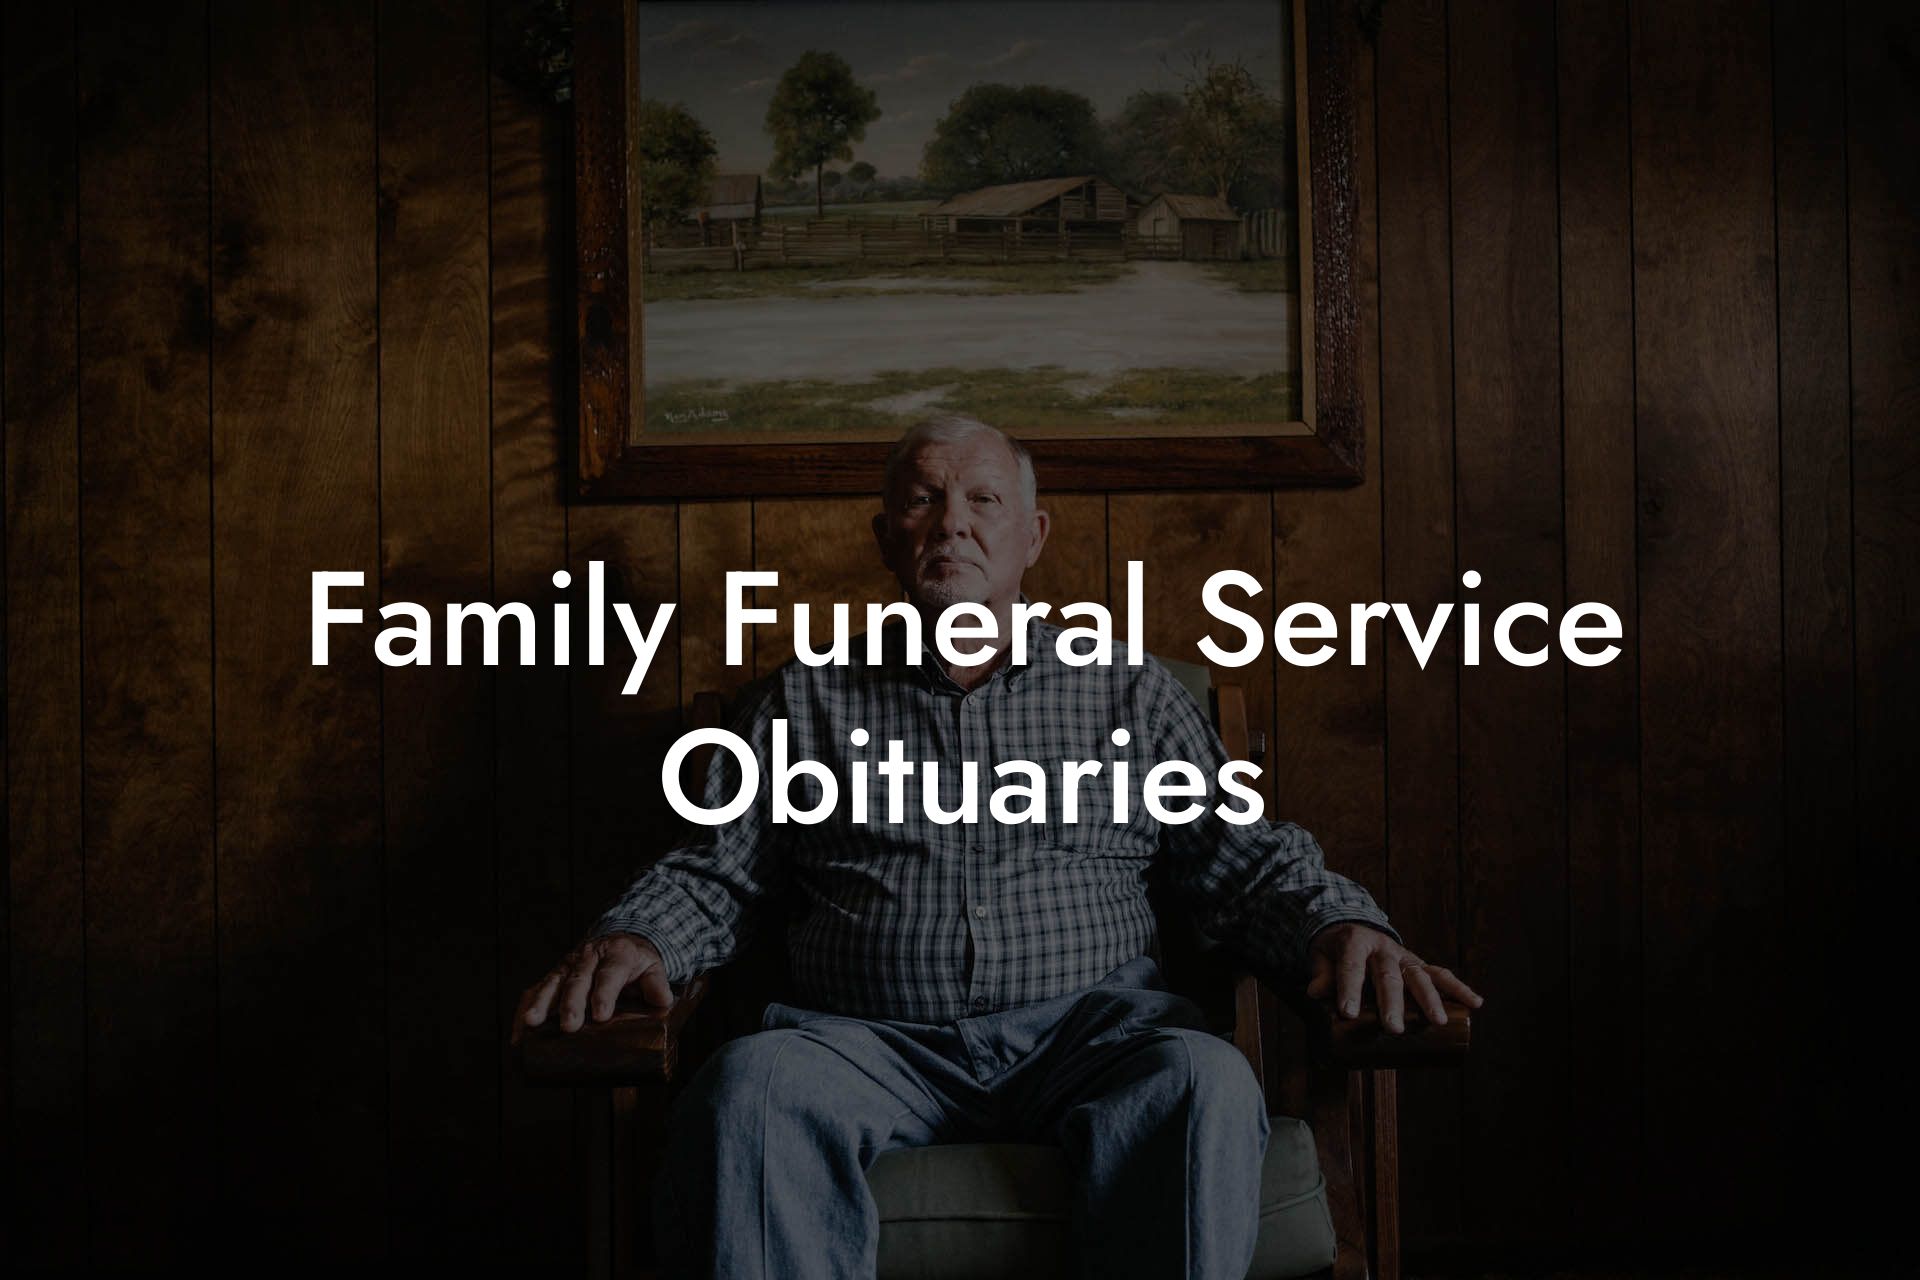 Family Funeral Service Obituaries